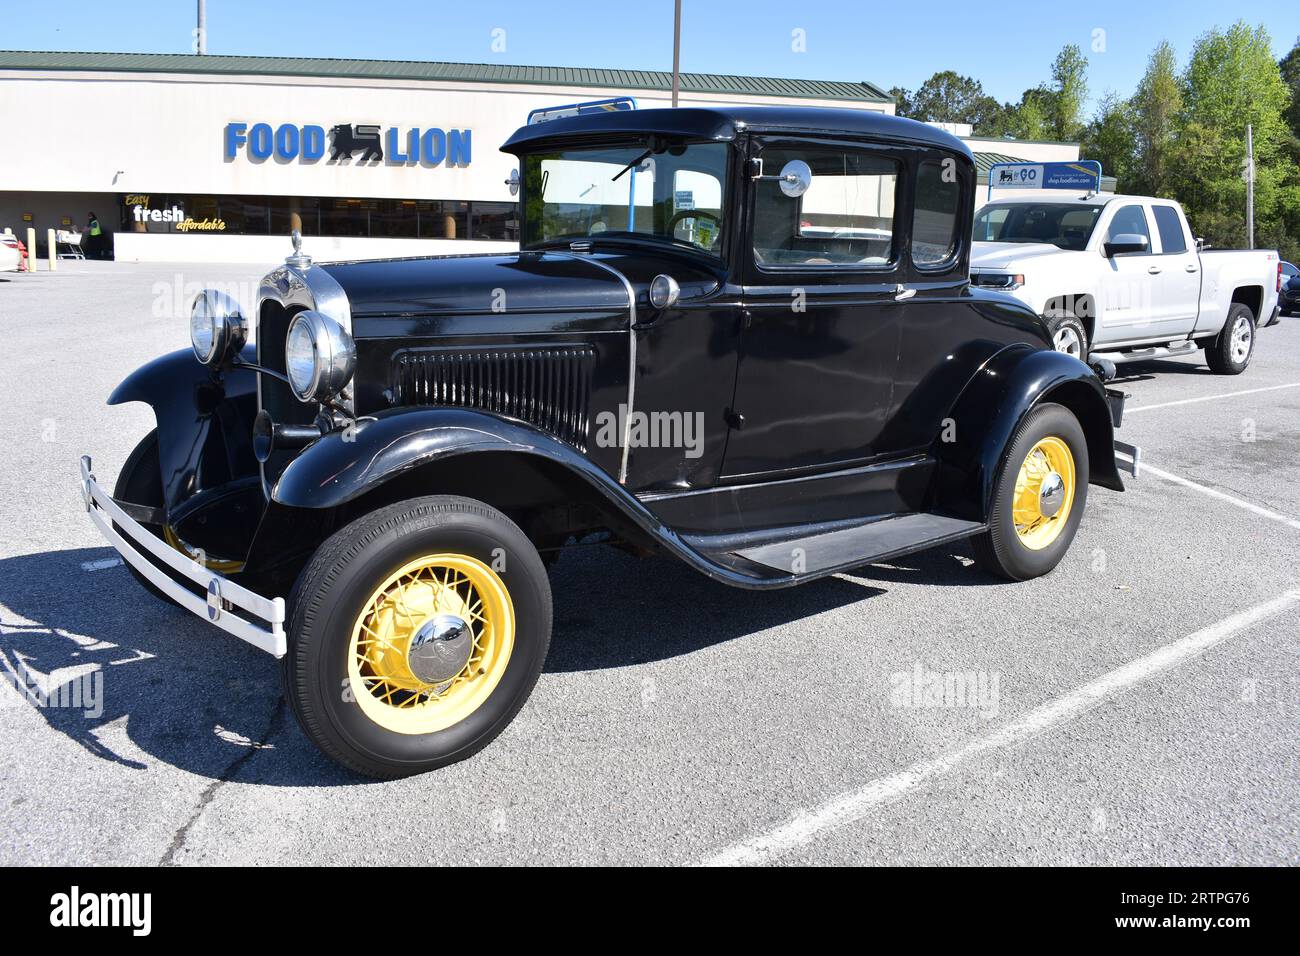 An Antique Ford Model A on display at a car show. Stock Photo